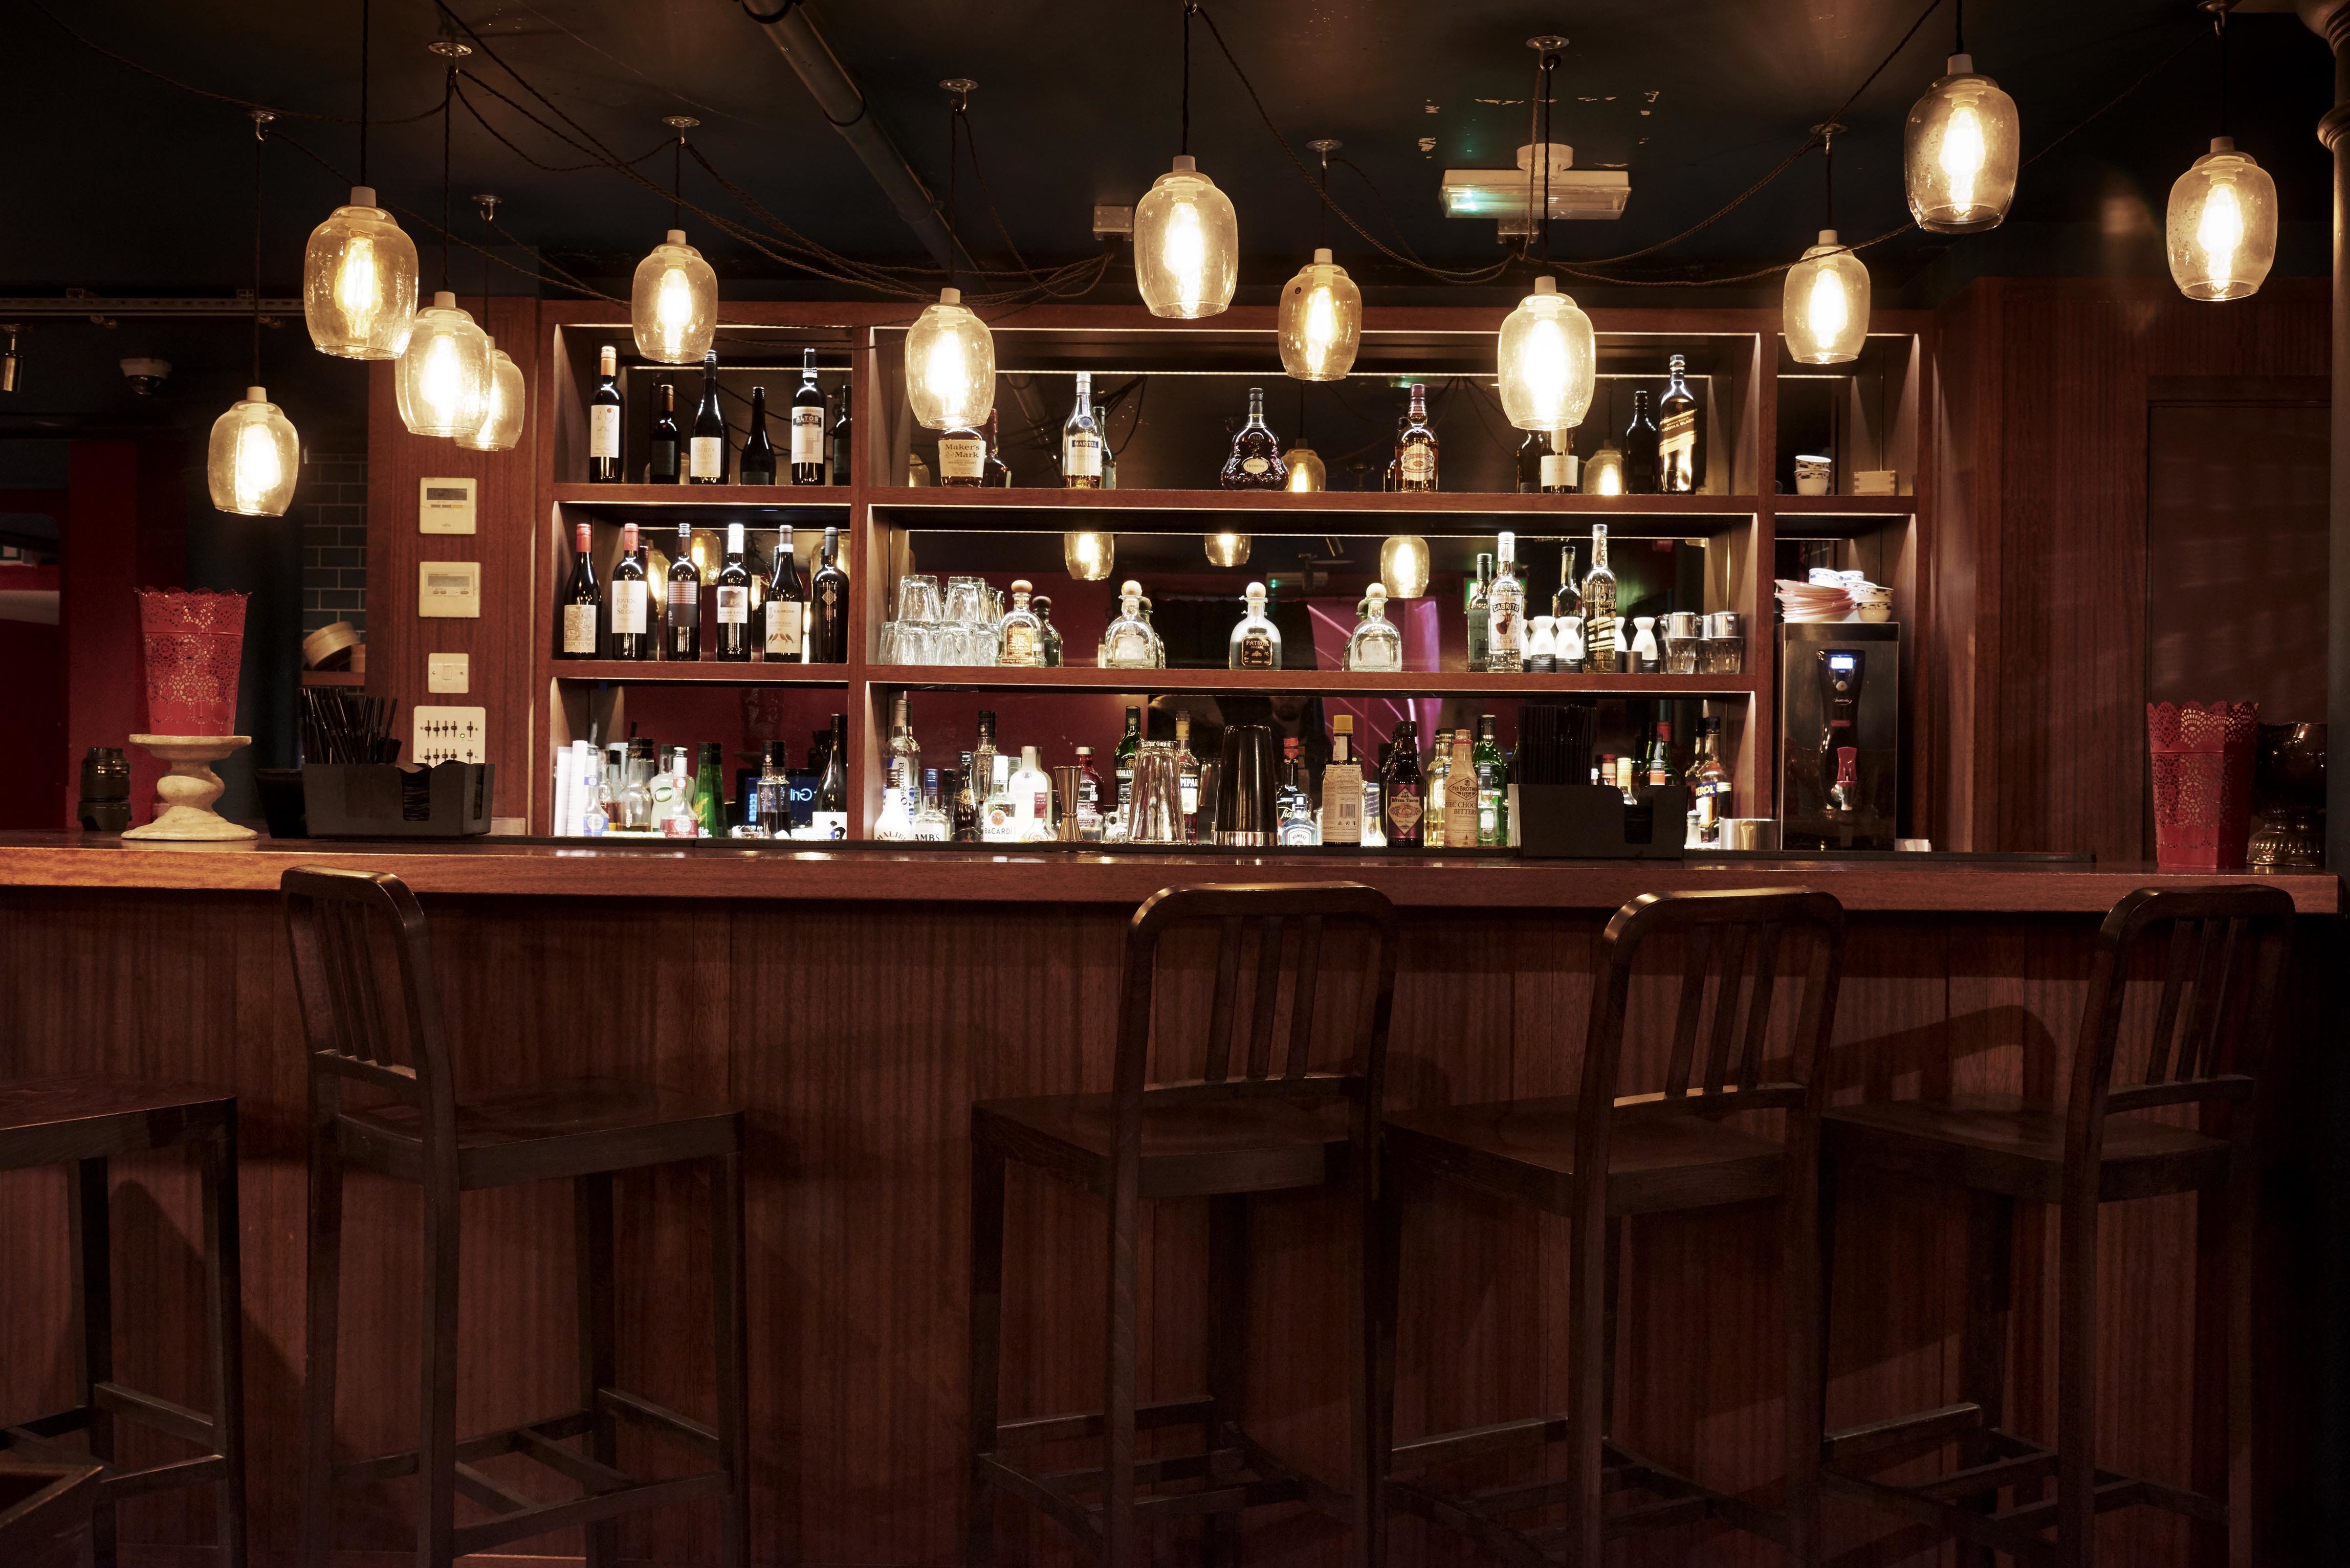 Old Pub - 3D Environment by Julia Myers on Dribbble